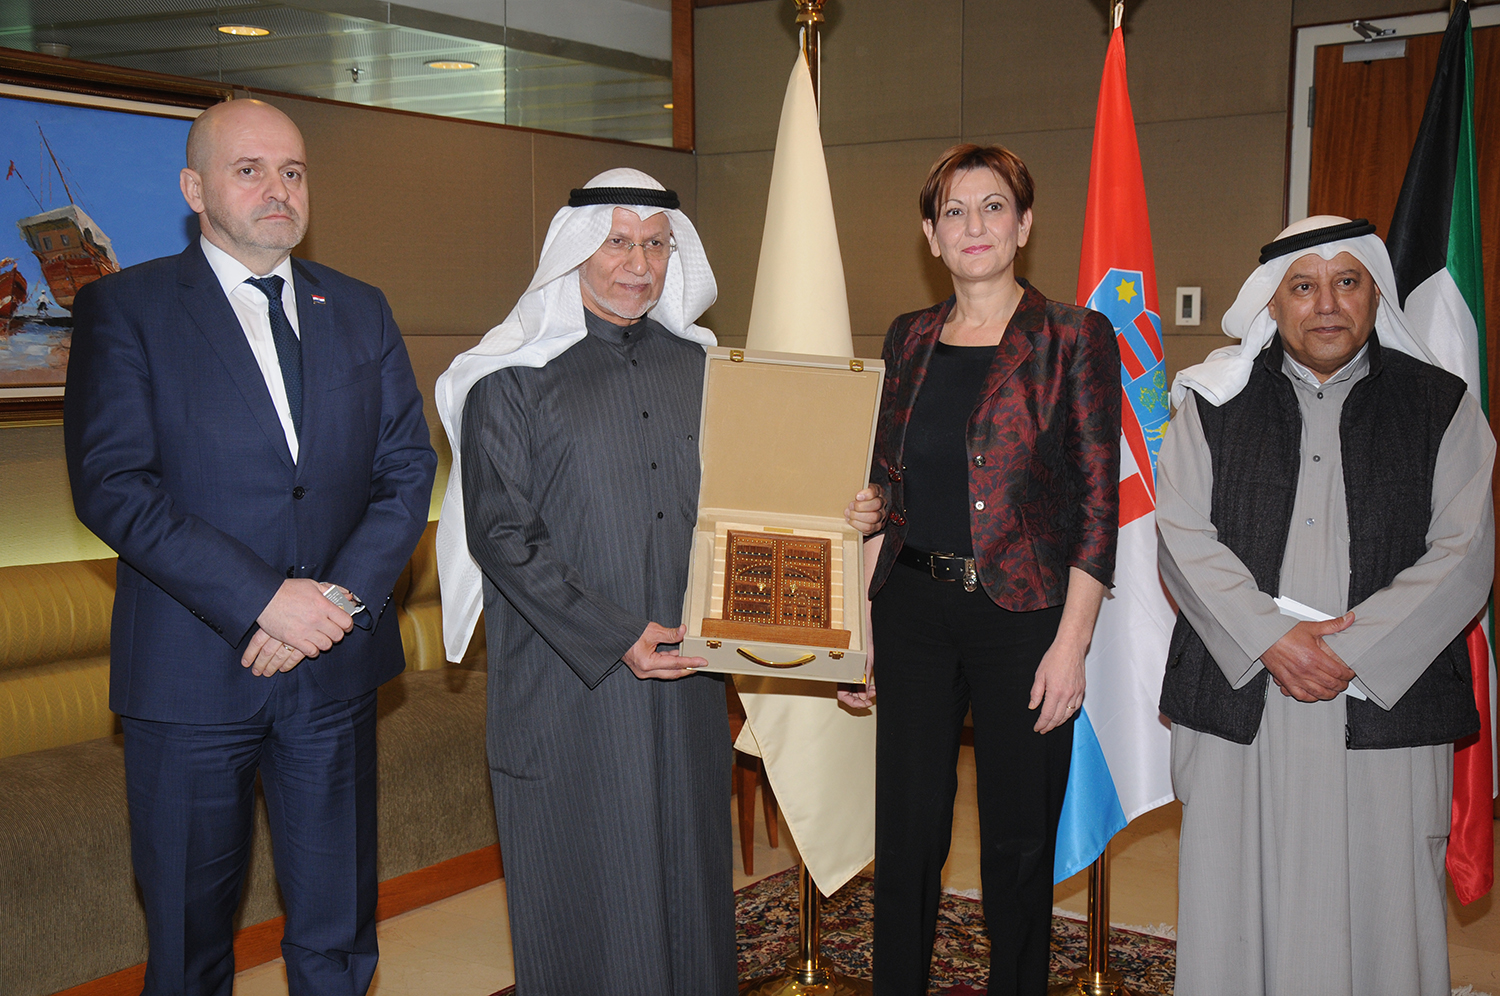 Croatian Deputy Prime Minister and Minister of Economy, Entrepreneurship and Crafts Martina Dalic visits Kuwait Chamber of Commerce and Industry (KCCI)